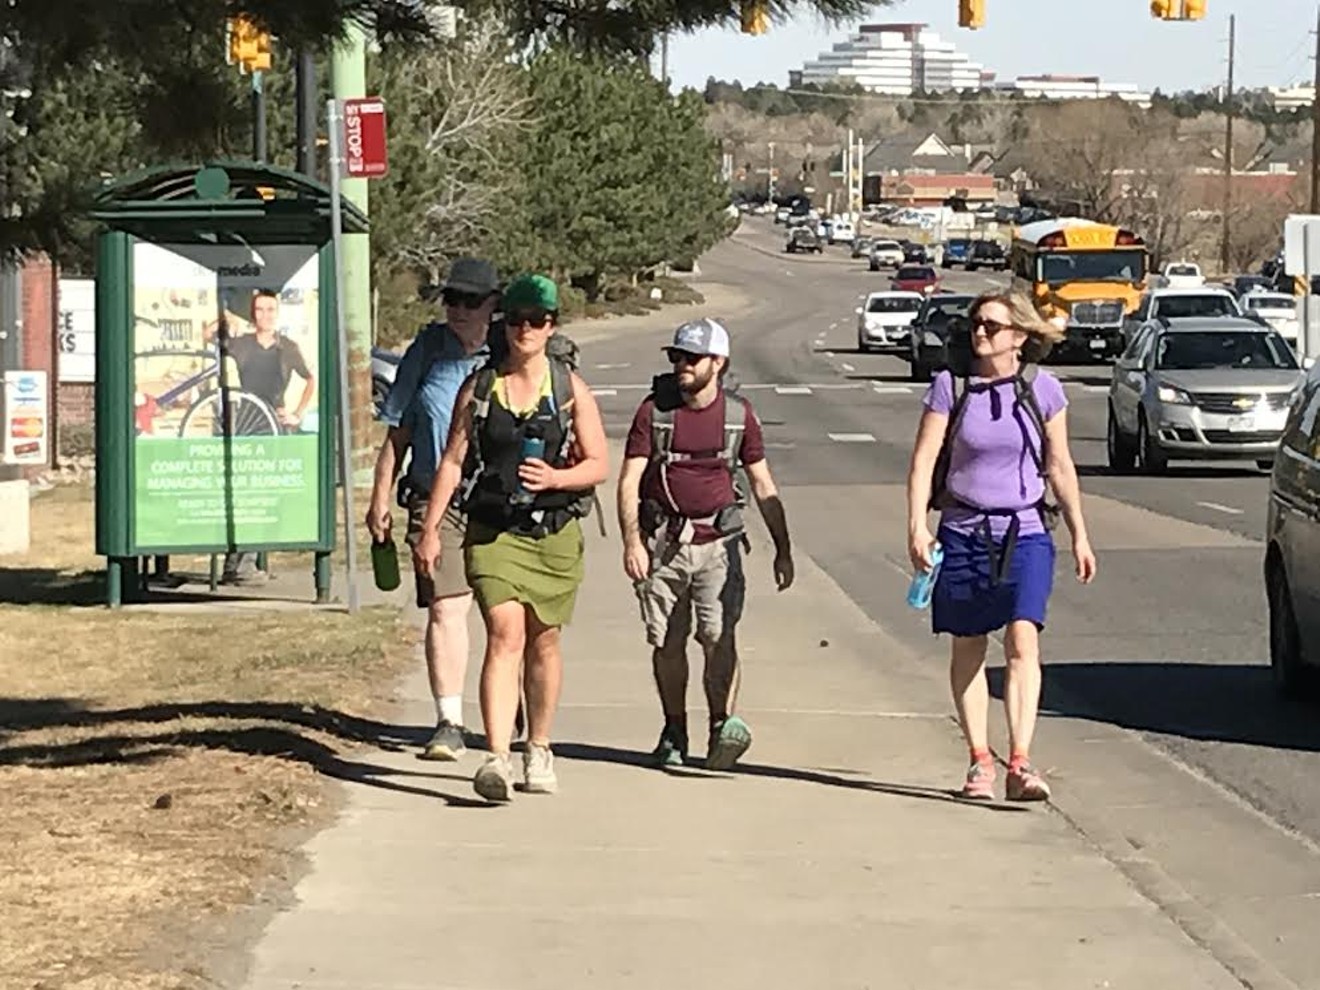 Liz Thomas (second from left) and her companions approach Comrade Brewing along Iliff Avenue.